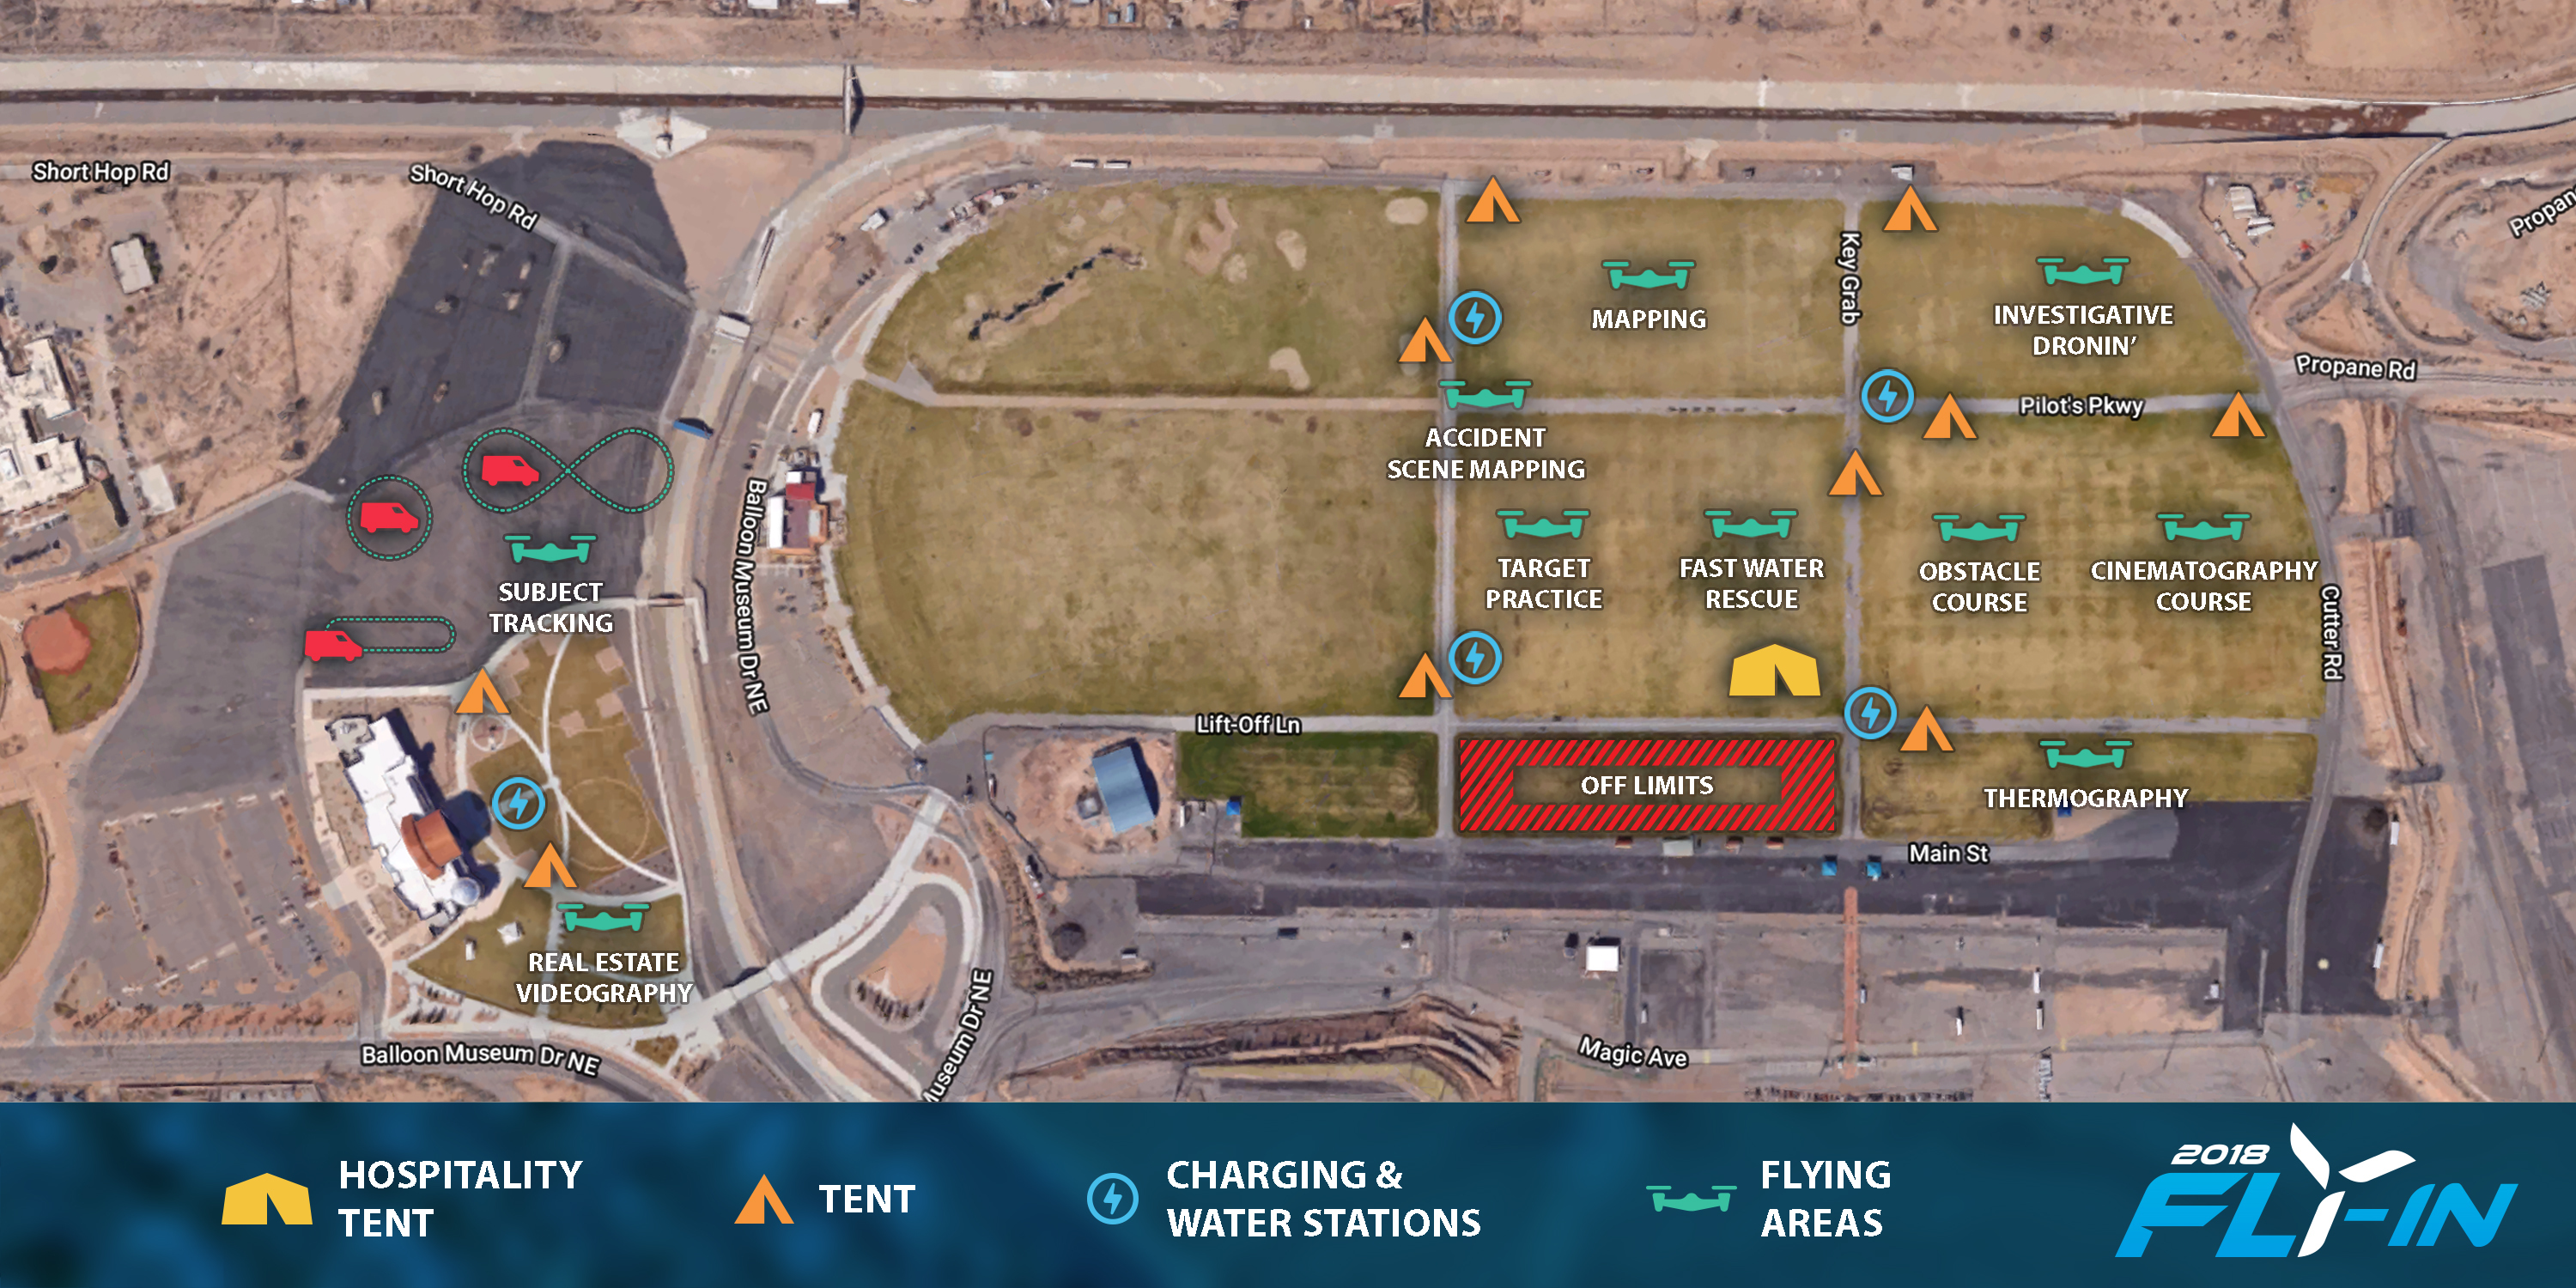 Balloon Fiesta Park Map of Drone Missions for Albuquerque Pilots